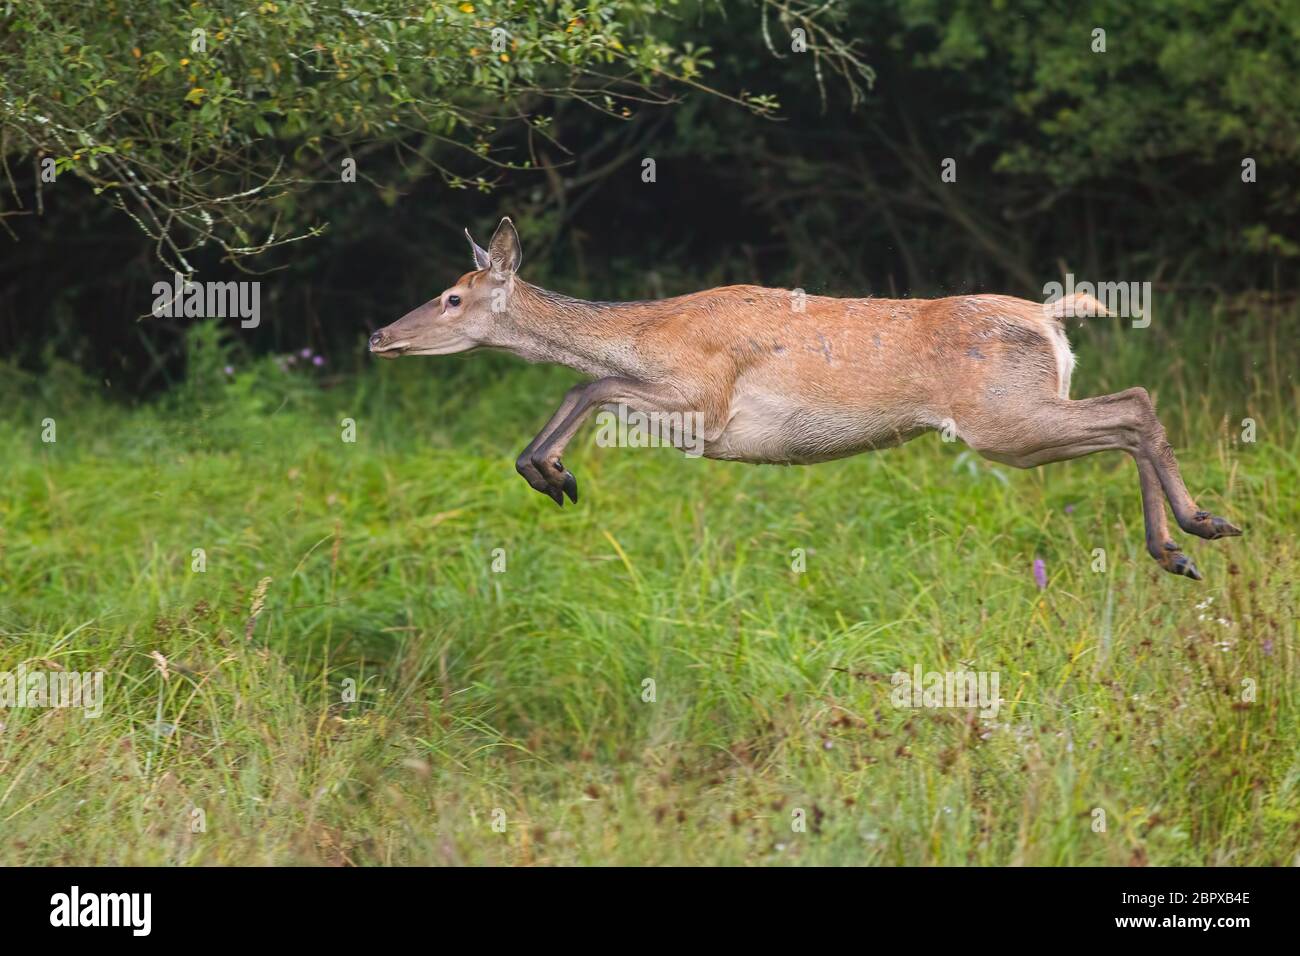 Red deer, cervus elaphus, runnig dynamically at high speed. Wildlife action scenery from nature. Mammal jumping while sprinting fast. Stock Photo